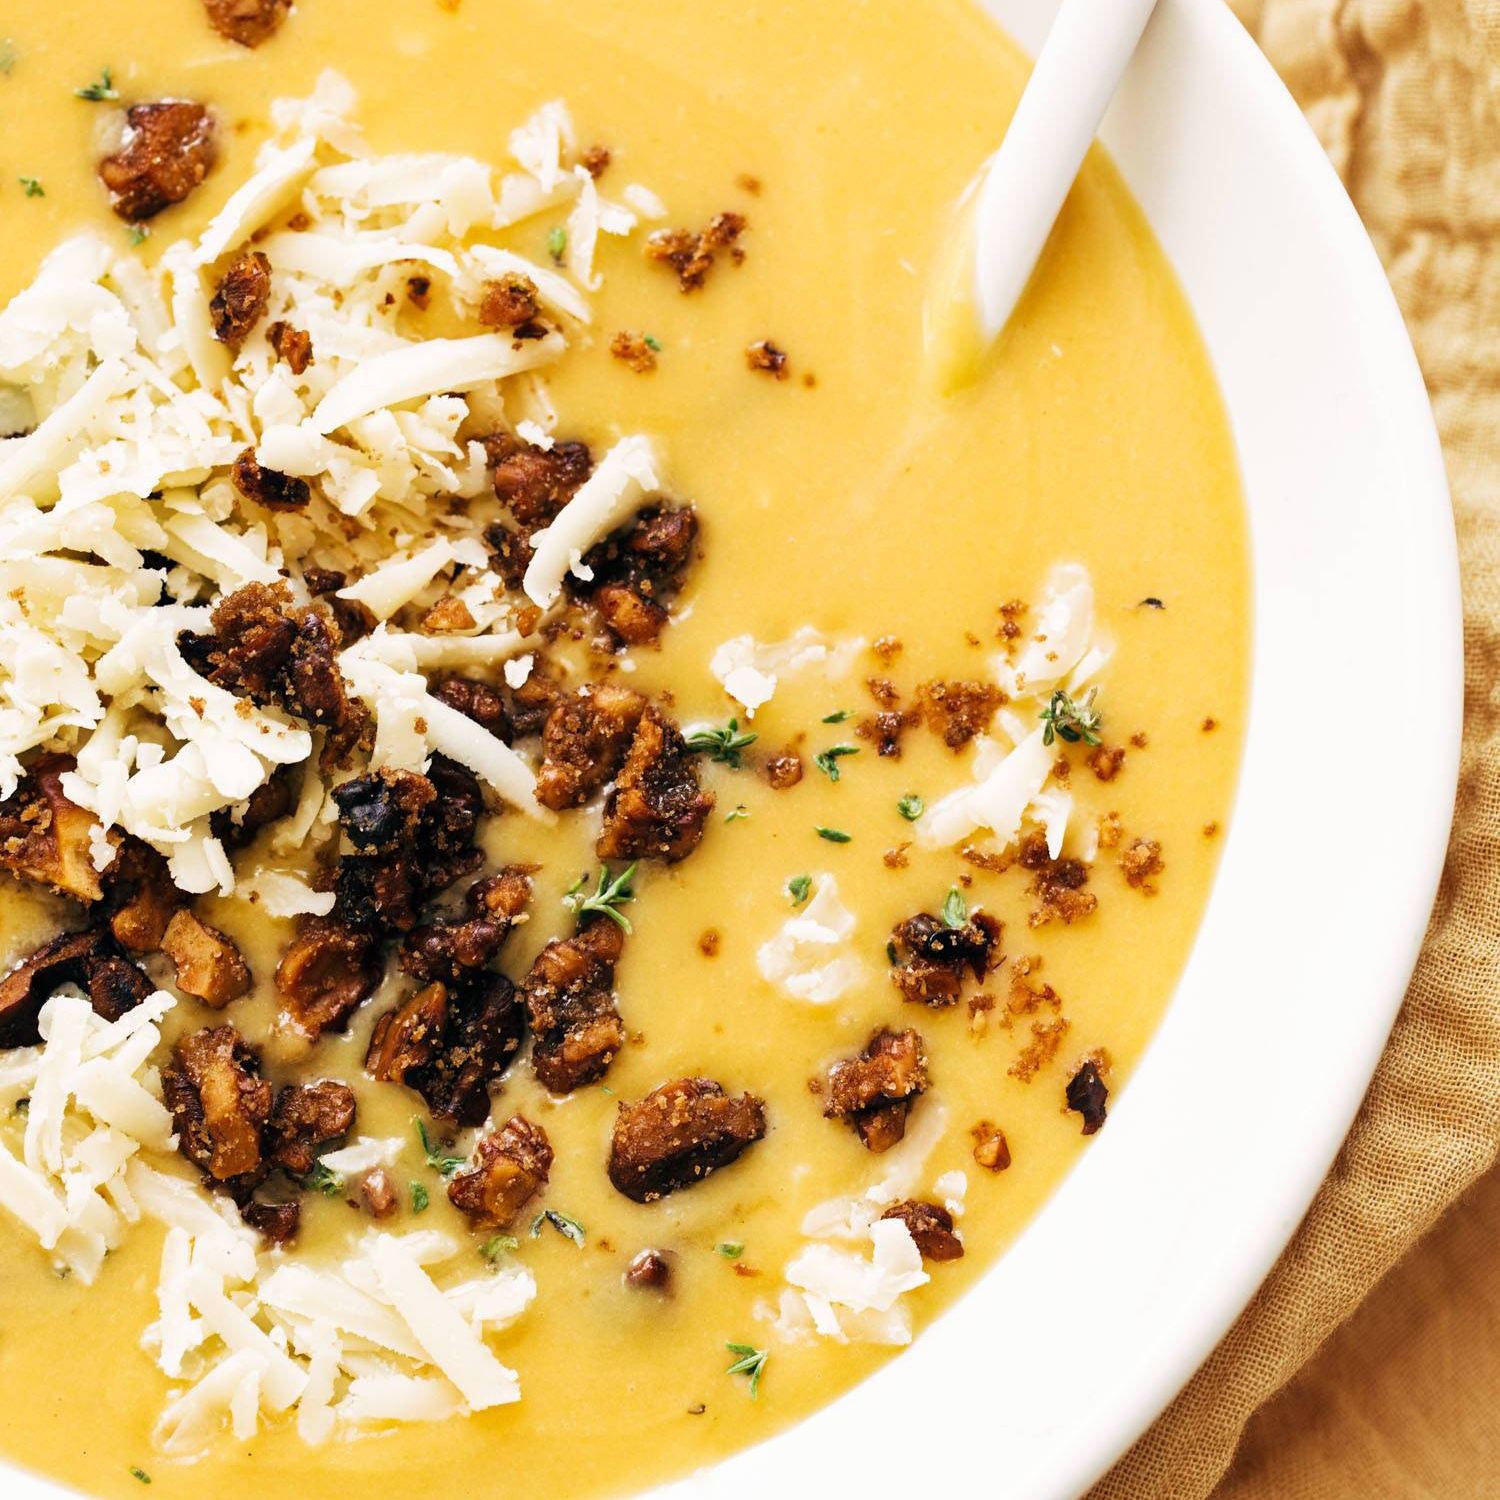 Pumpkin soup with walnut crispies in a bowl.